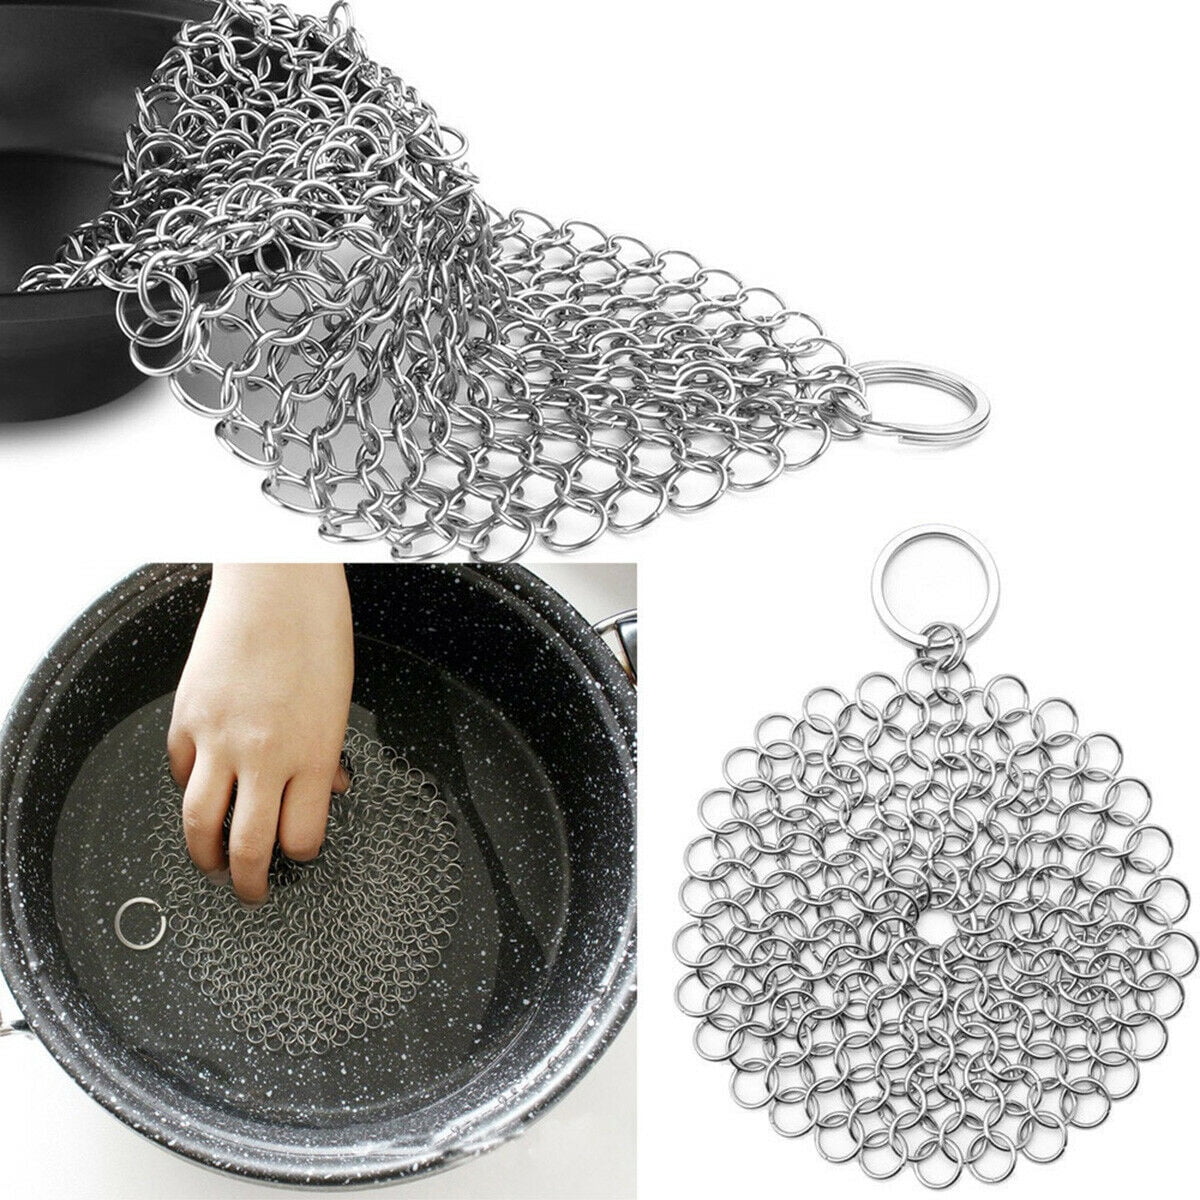 Chainmail Scrubber for Cast Iron - The Peppermill